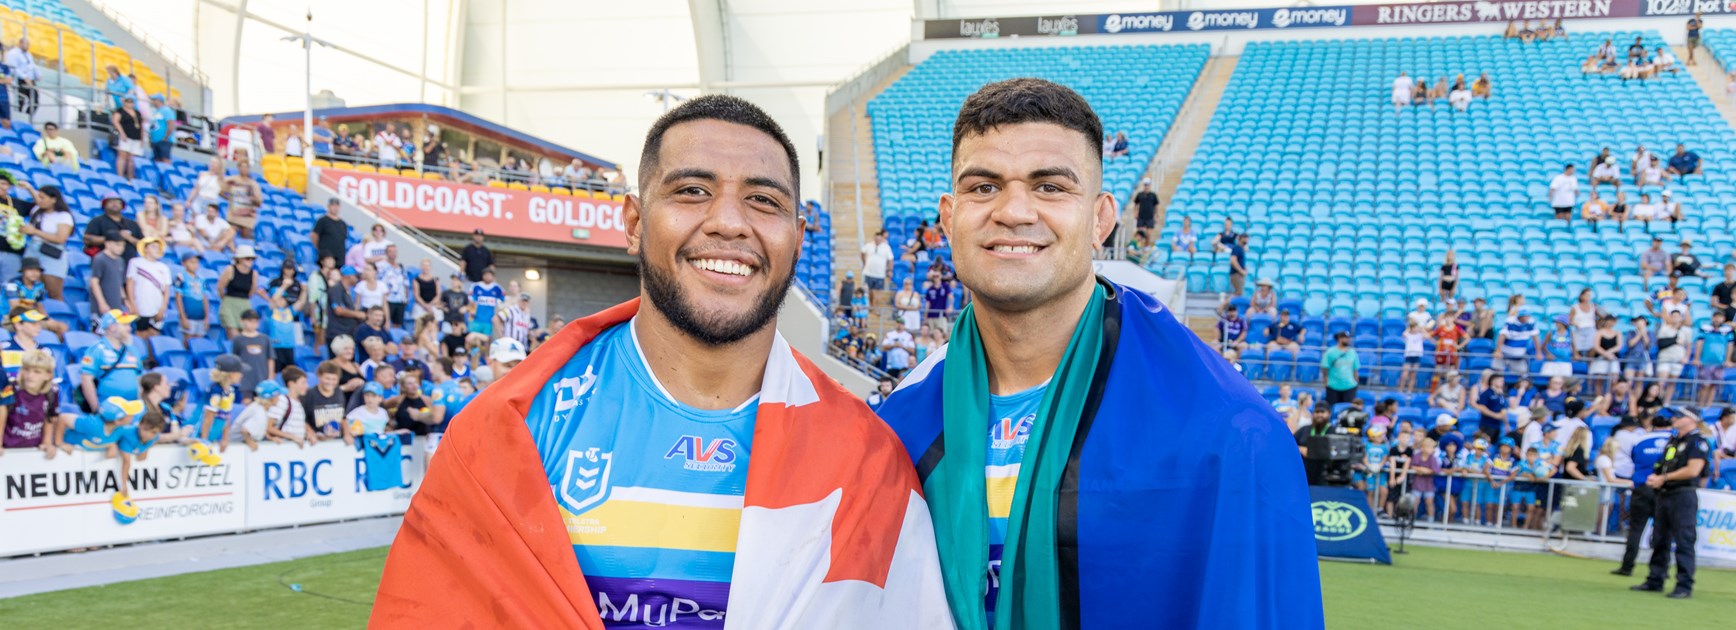 Titans in harmony for Multicultural Round